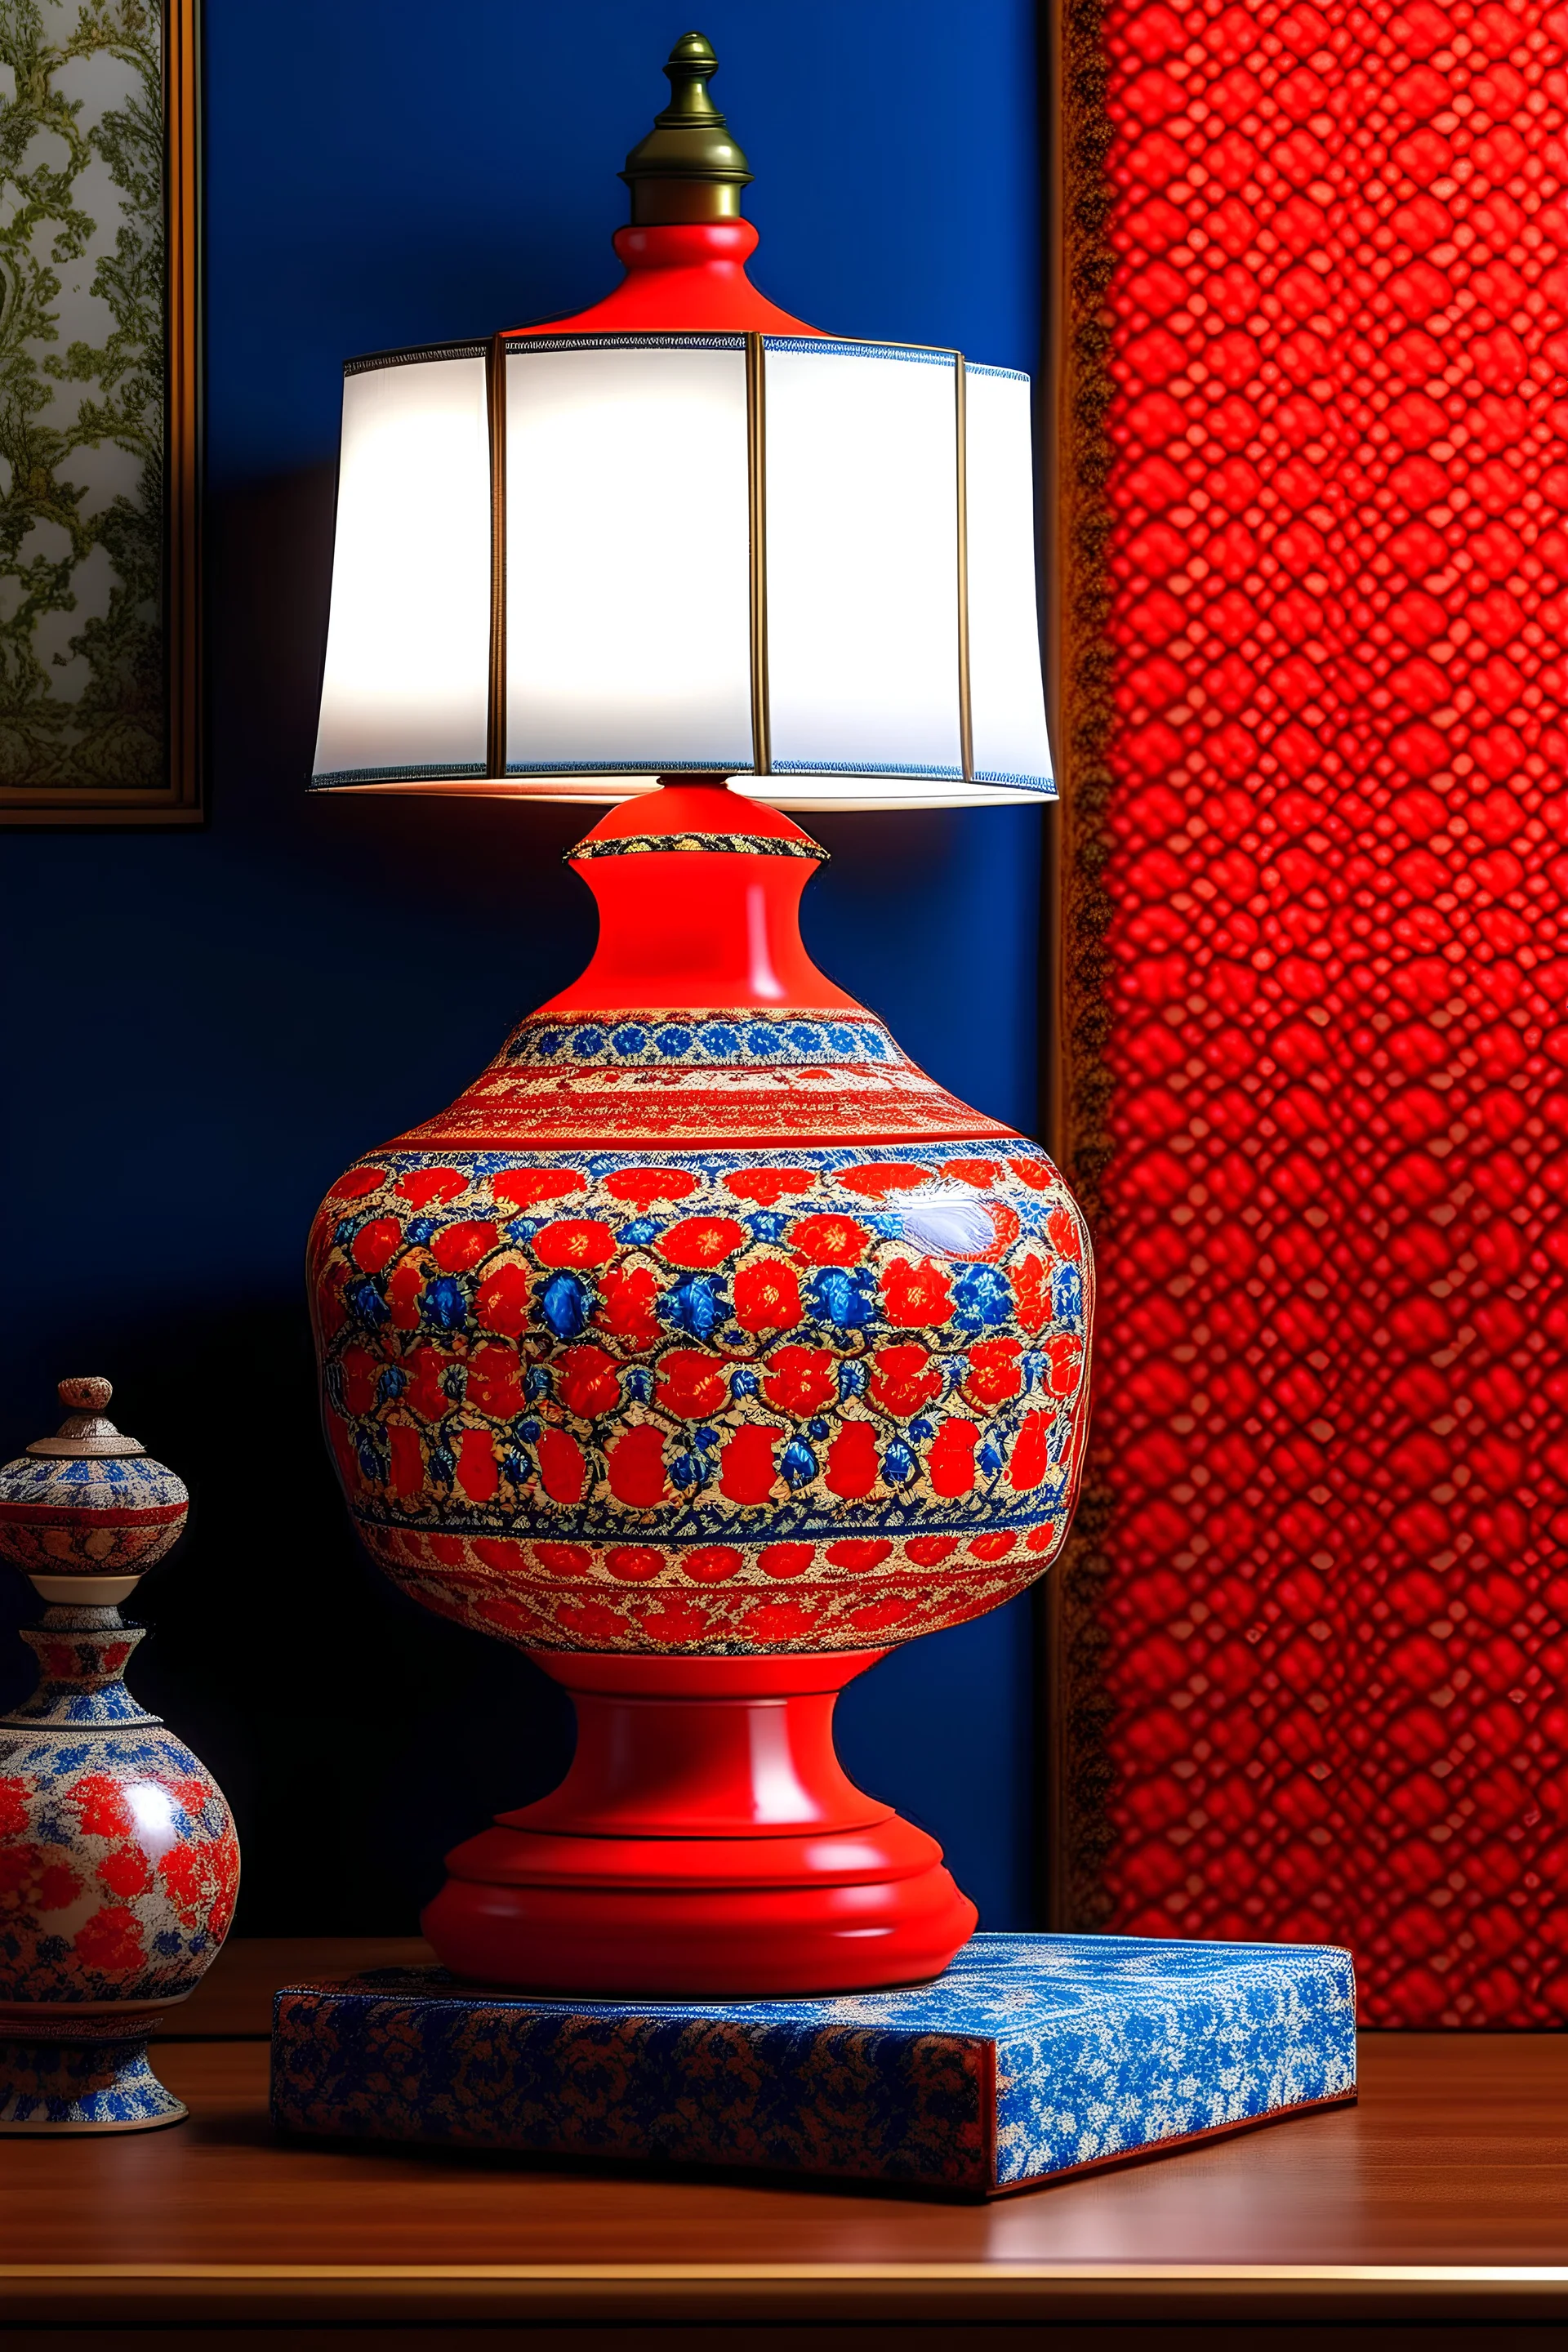 Portuguese tiles pattern ceramic vase with a red big lampshade